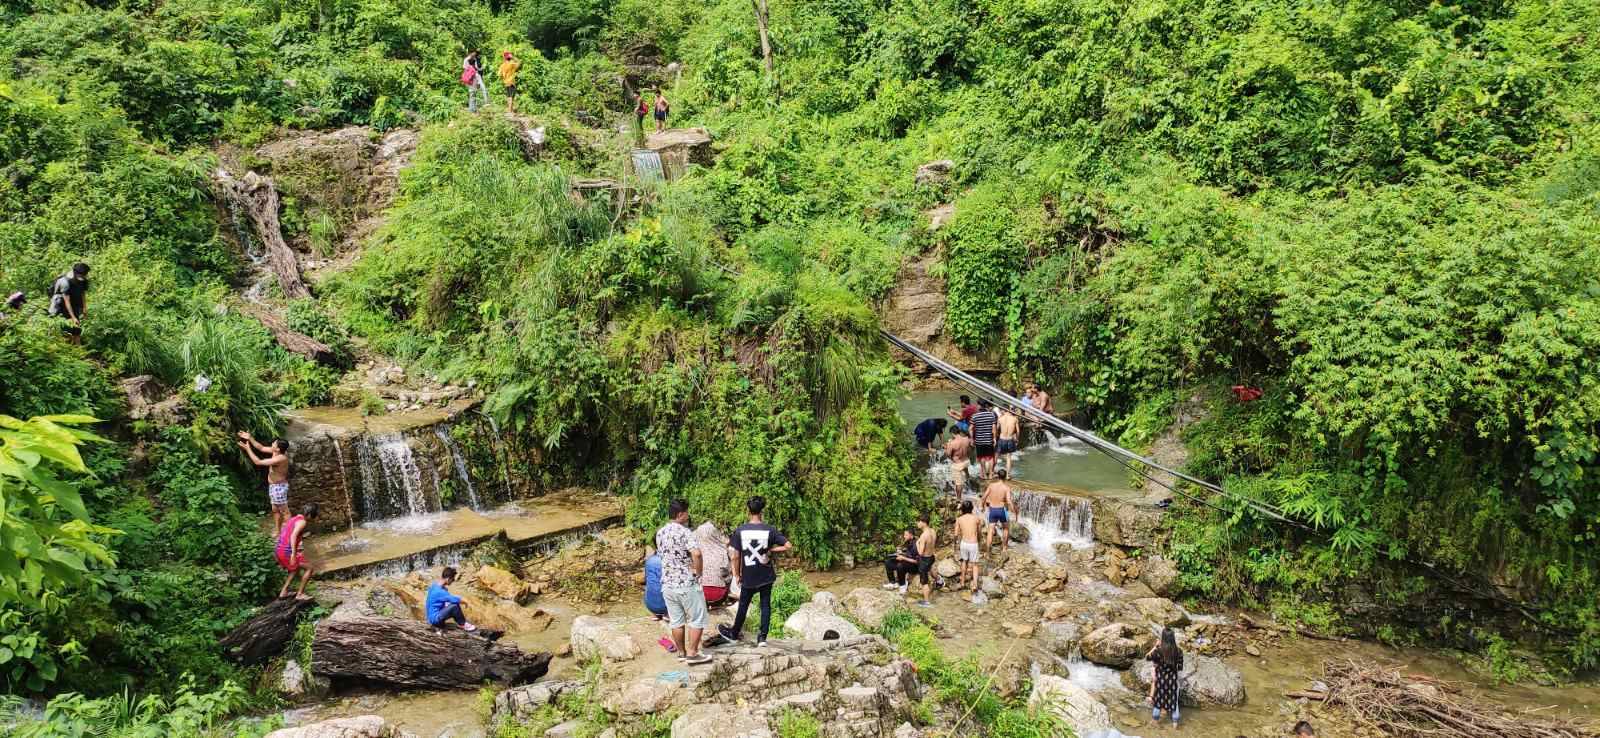 People enjoying the waterfall to escape from scorching heat.